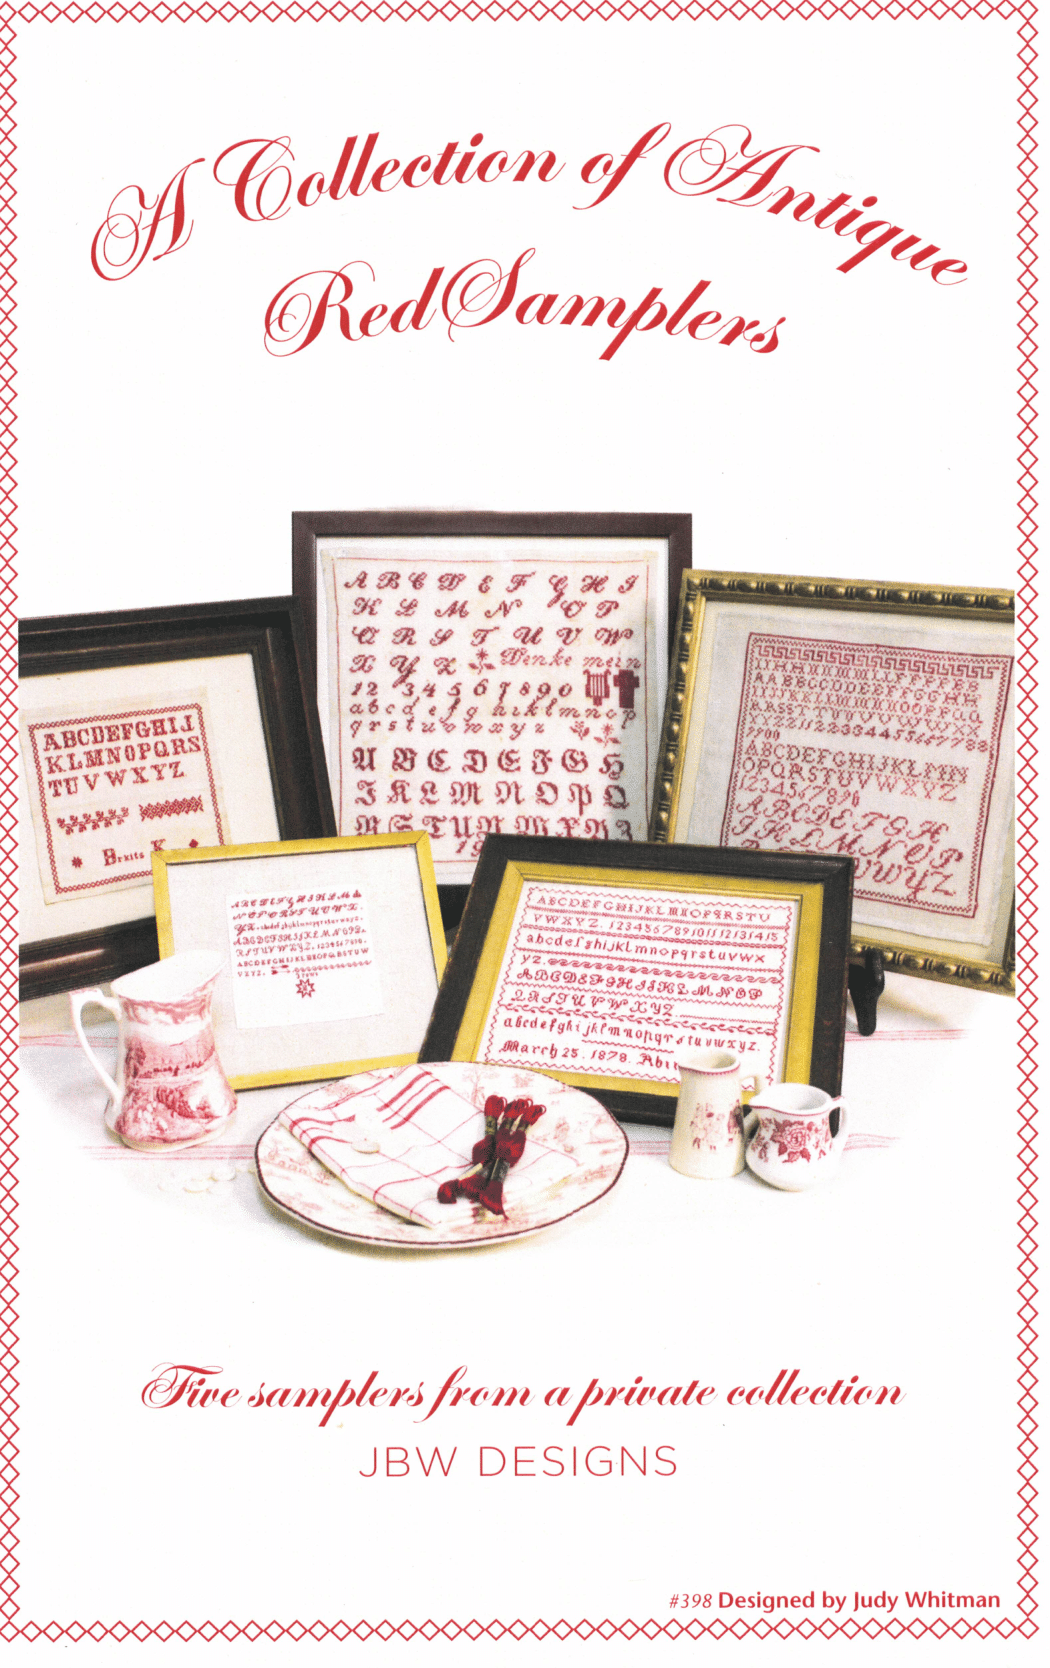 JBWD - A Collection Of Antique Red Samplers